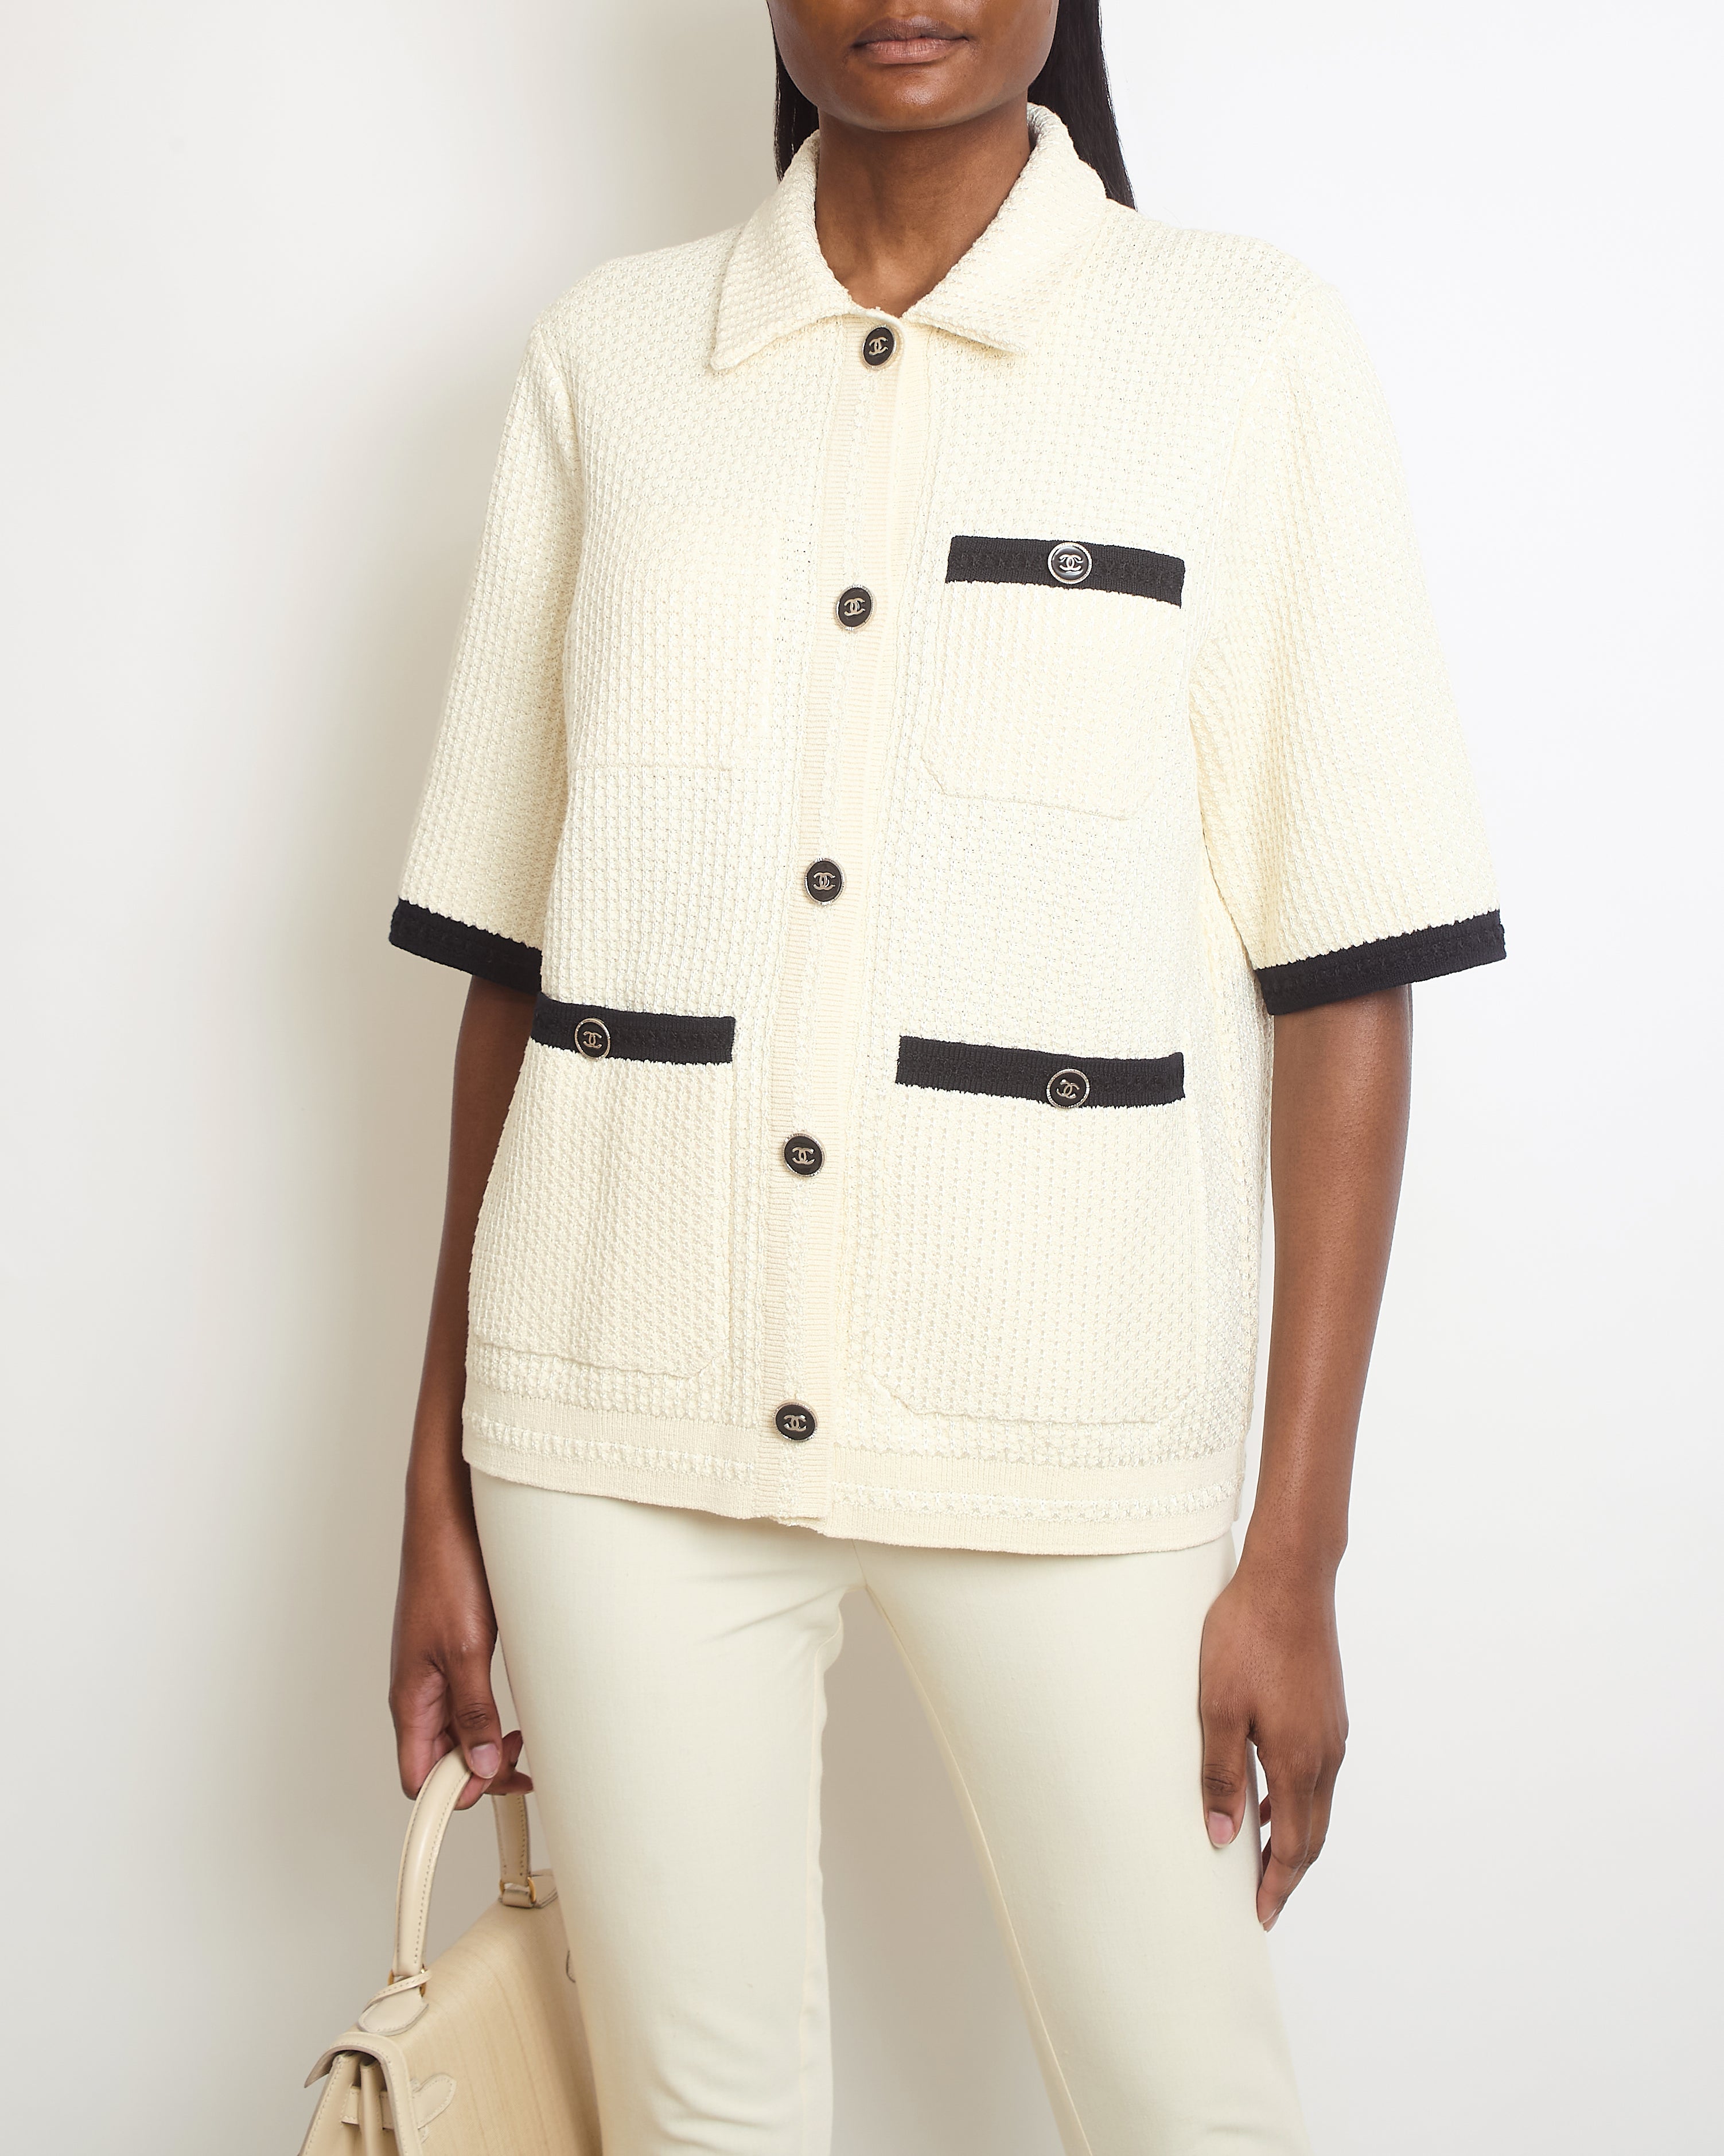 Chanel Cream Tweed Over-Sized Short Sleeve Shirt with Black Trim ...